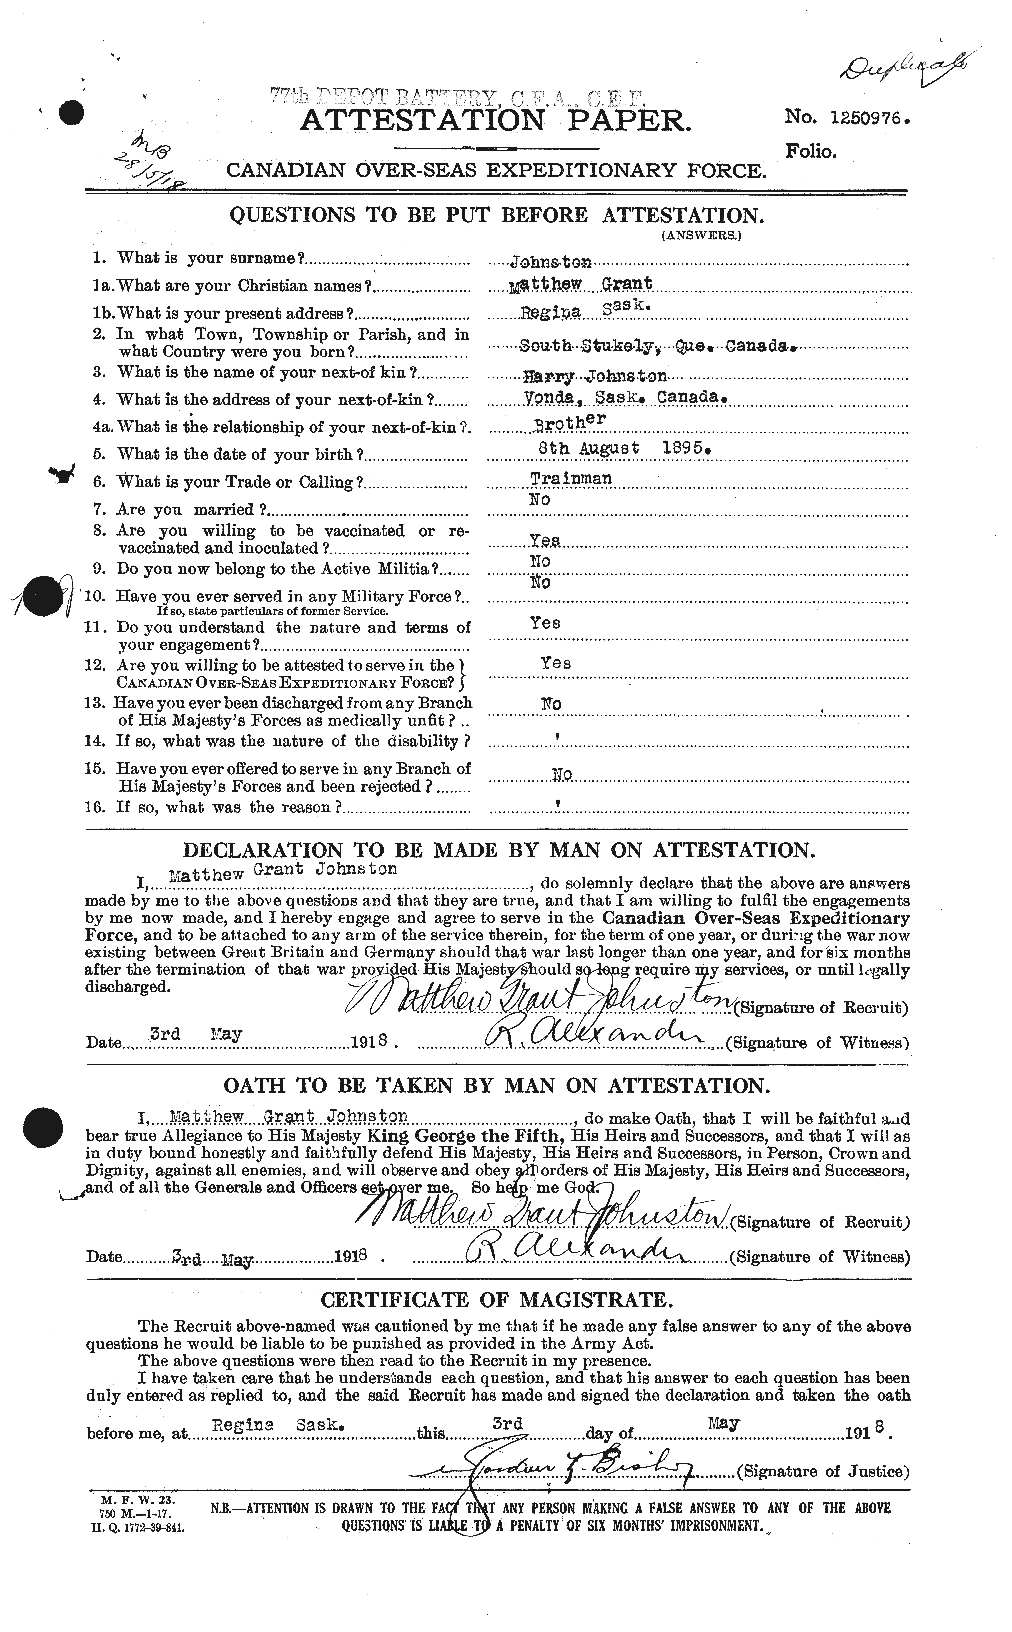 Personnel Records of the First World War - CEF 422979a